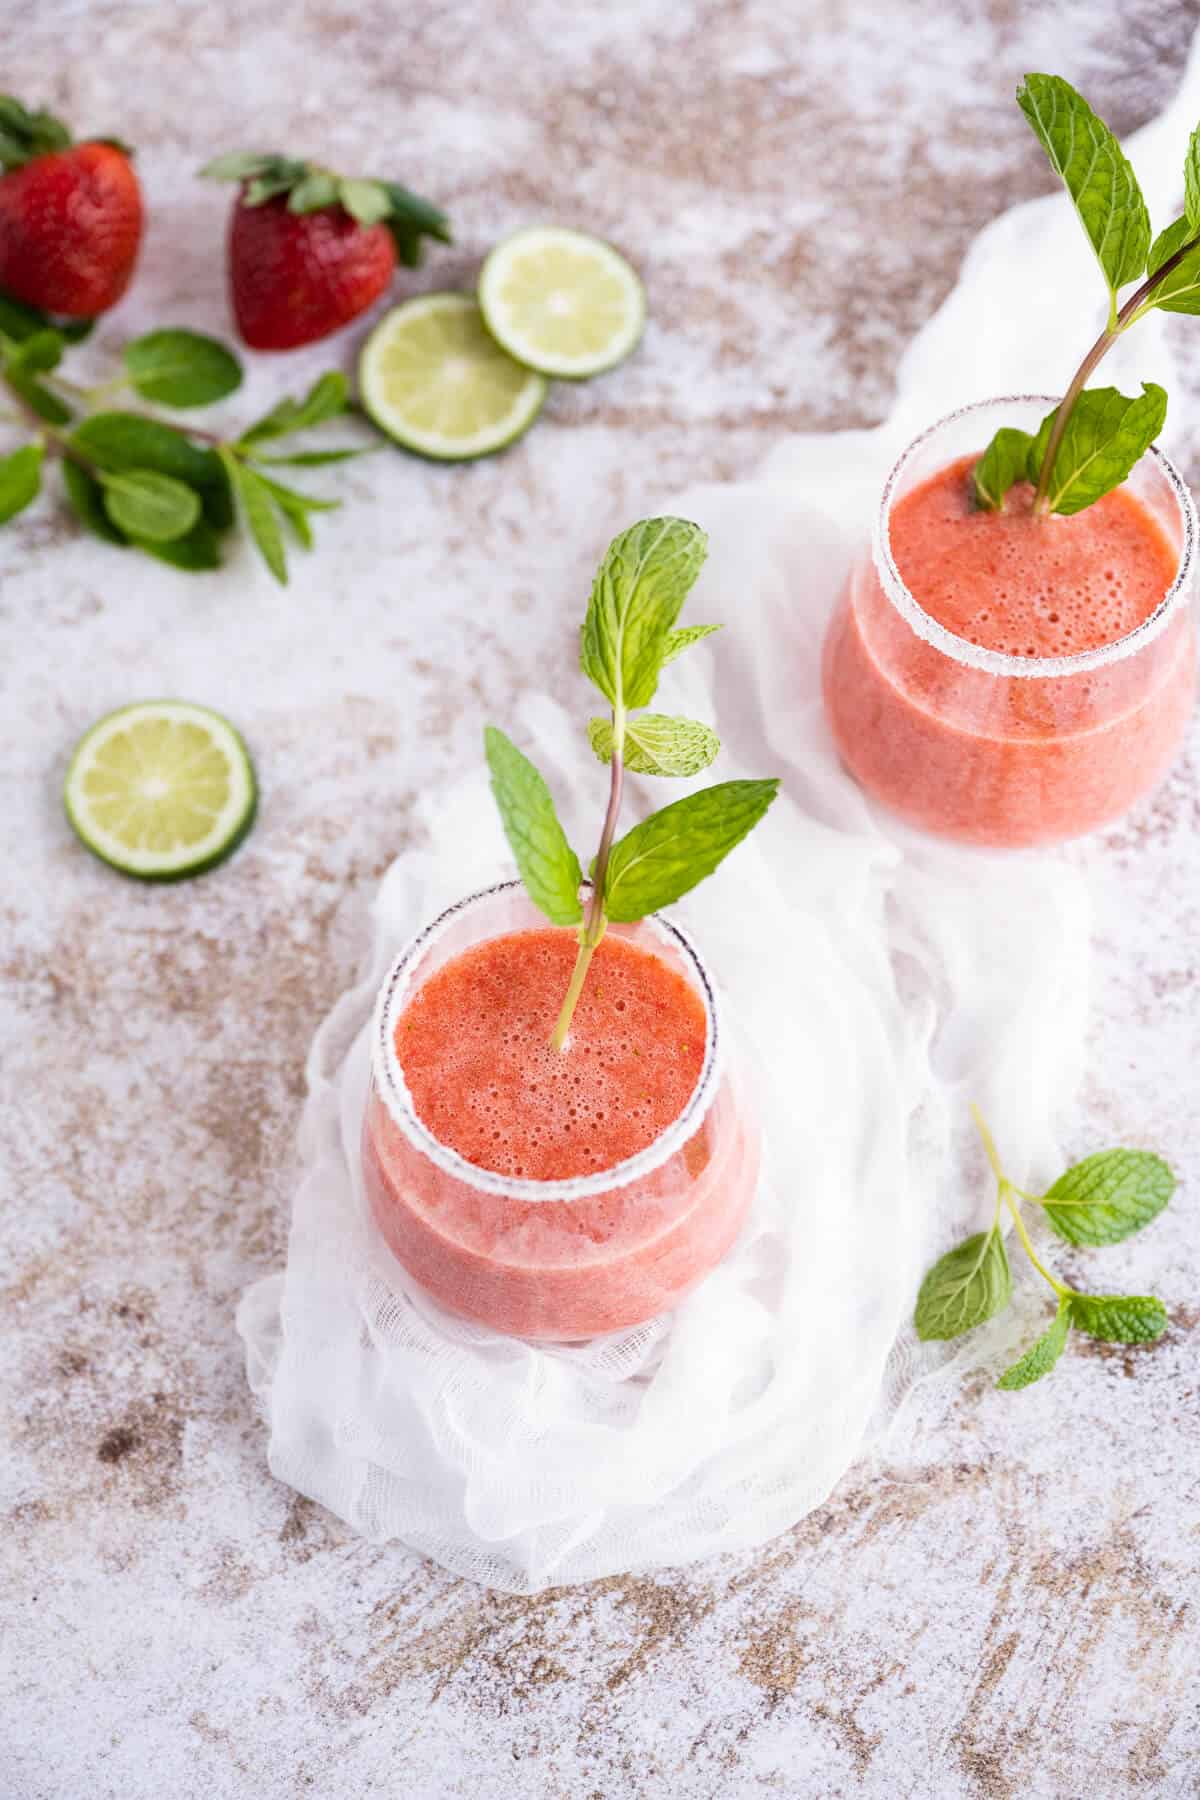 Two Strawberry Mocktails in clear stemless wine glasses garnished with fresh mint. Glass is rimmed in sugar. Sliced limes and fresh strawberries in the background.